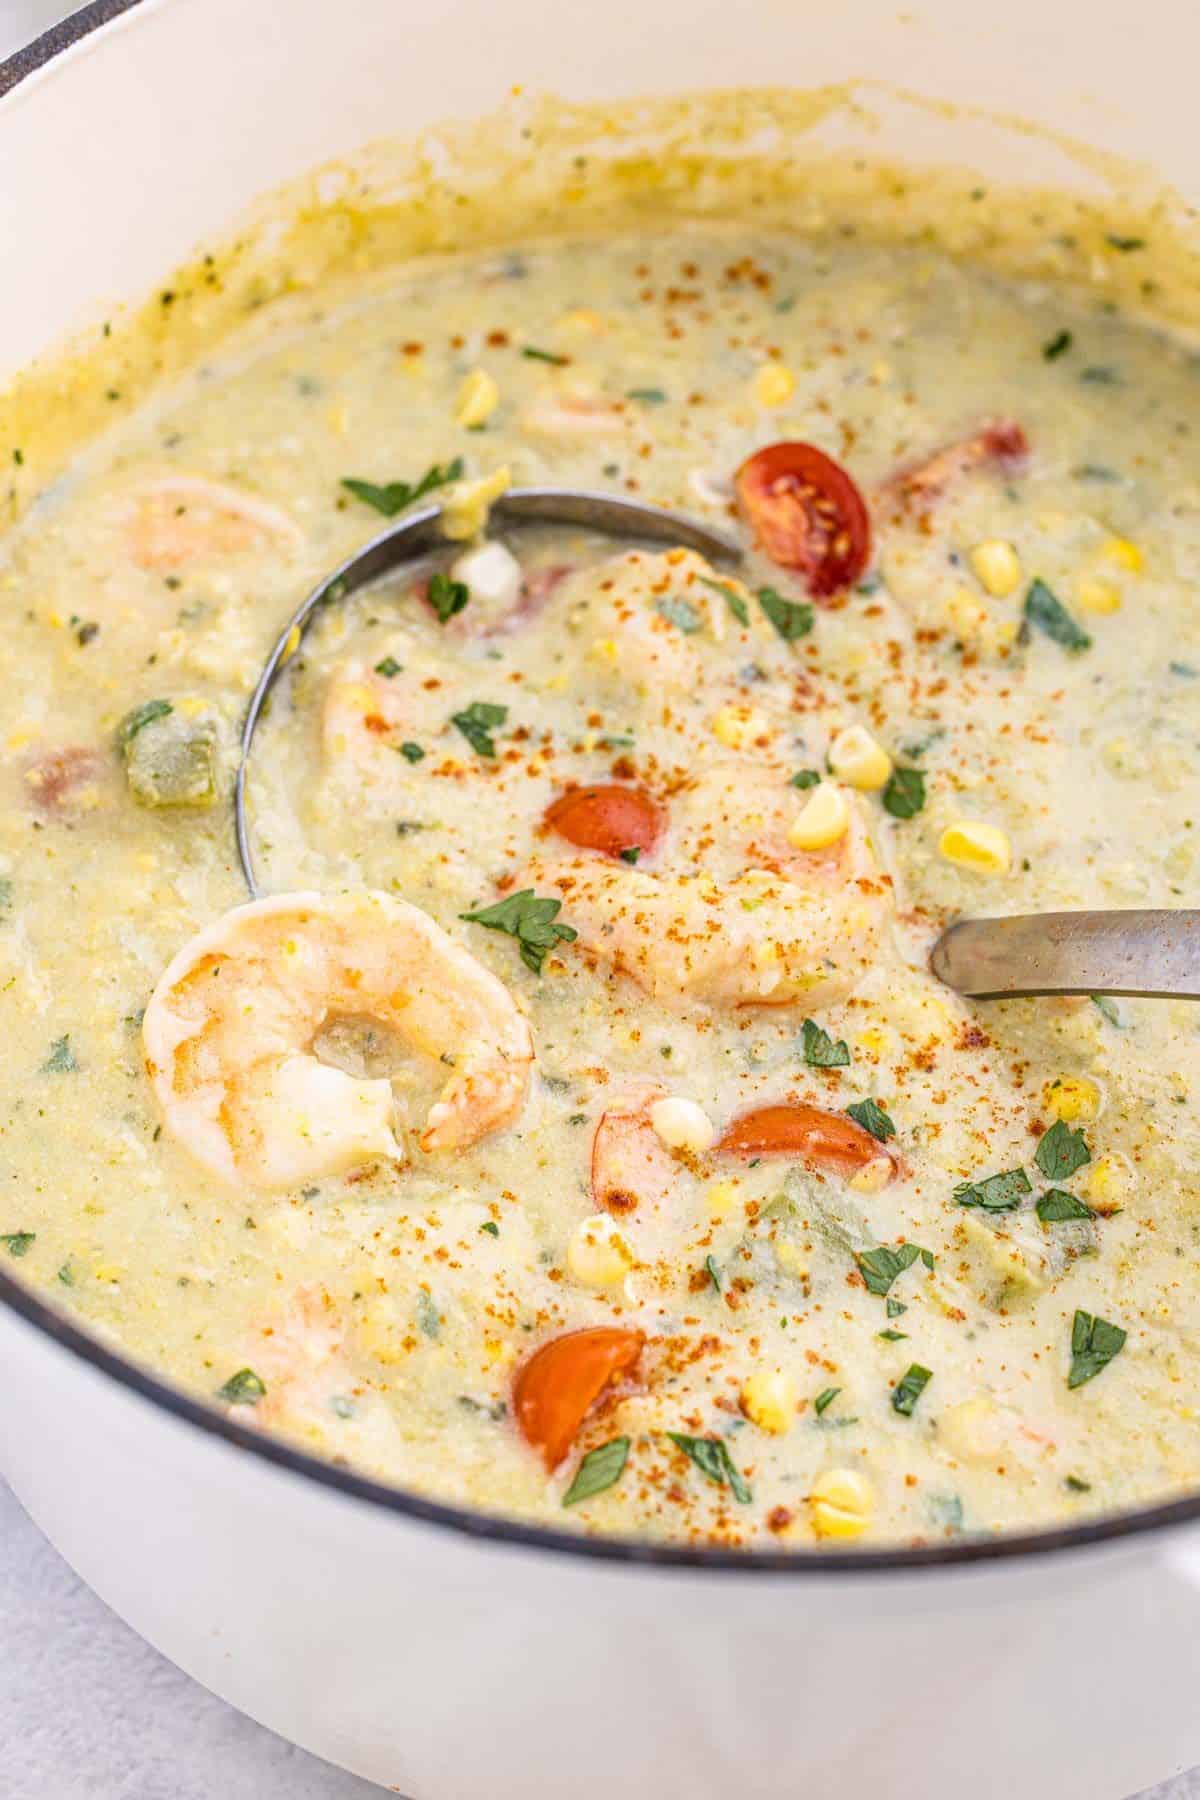 A ladle scooping up a serving of shrimp and corn chowder.